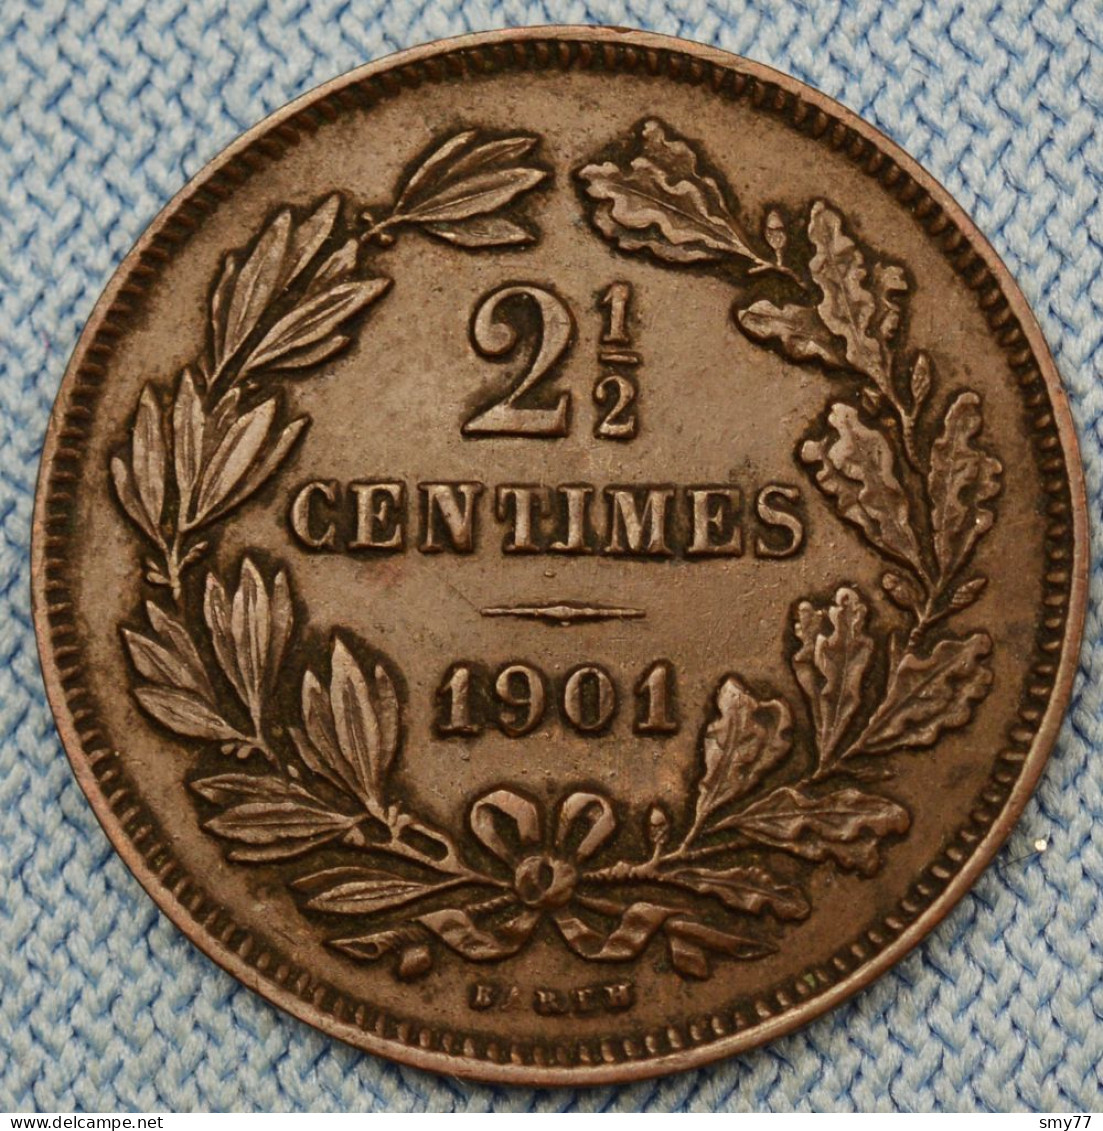 Luxembourg • 2 1/2 Centimes 1901 • SUP / XF+  • B_RTH - Error - A Almost Absent • Luxemburg •  [24-573] - Luxembourg